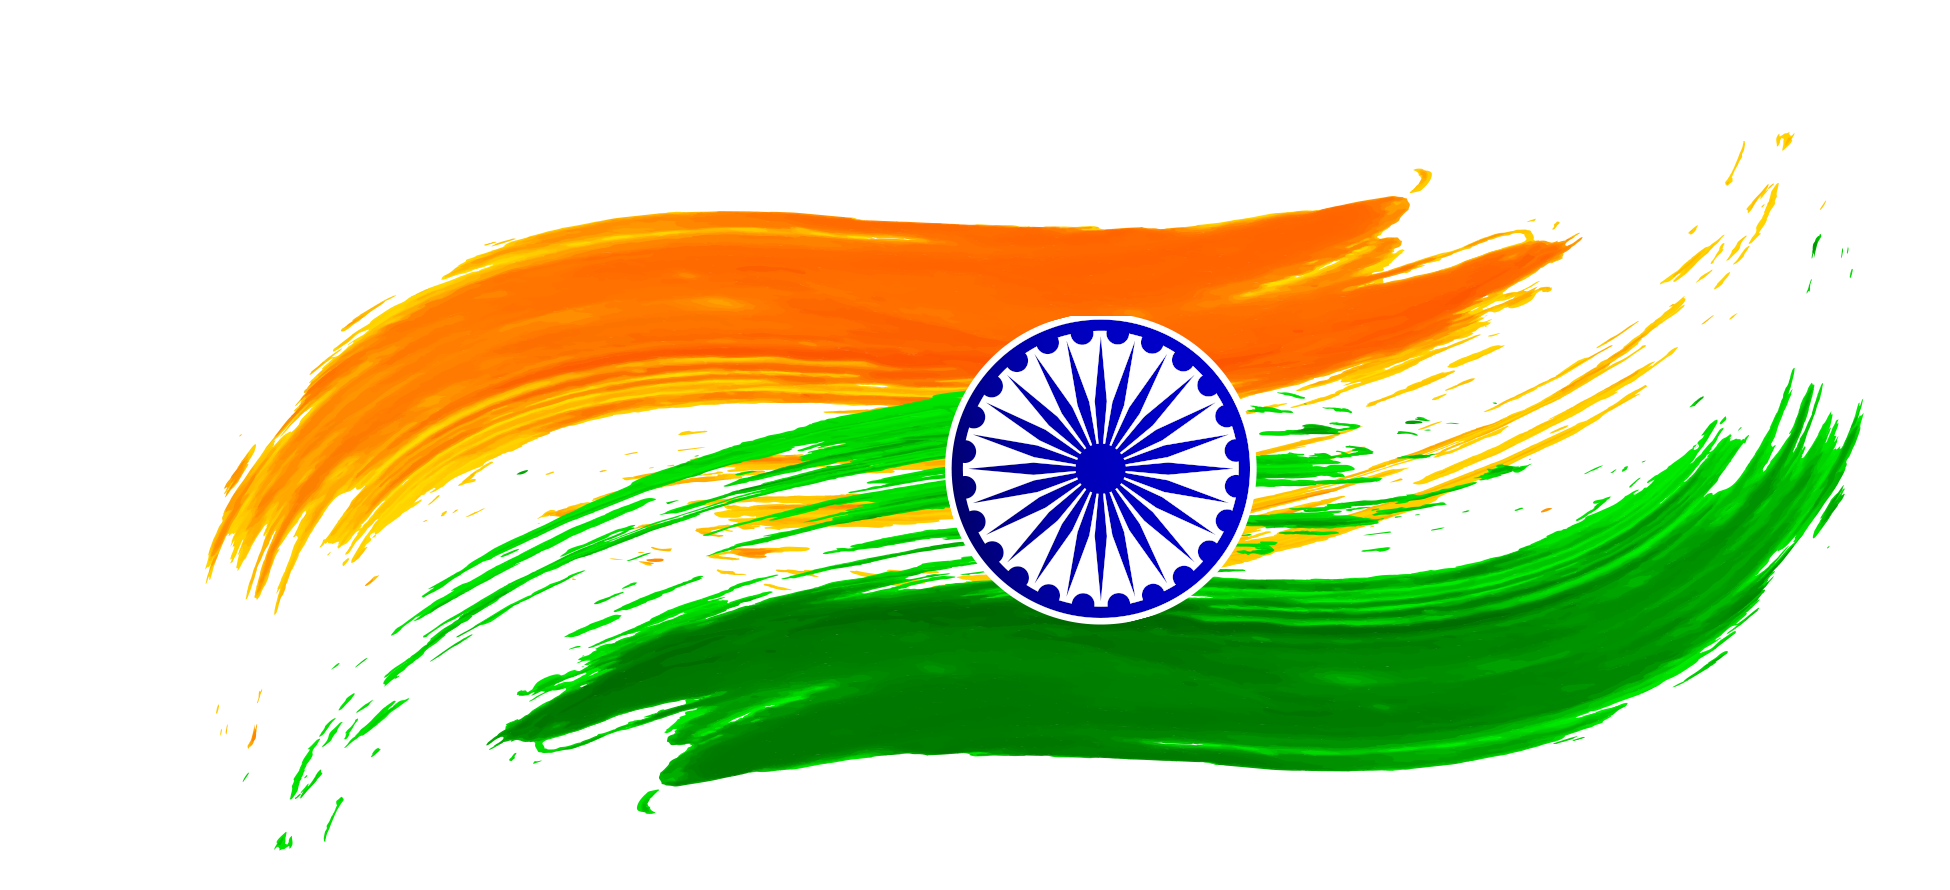 Indian Flag PNG HD Images, Indonesia Flag Free Download - Free ...